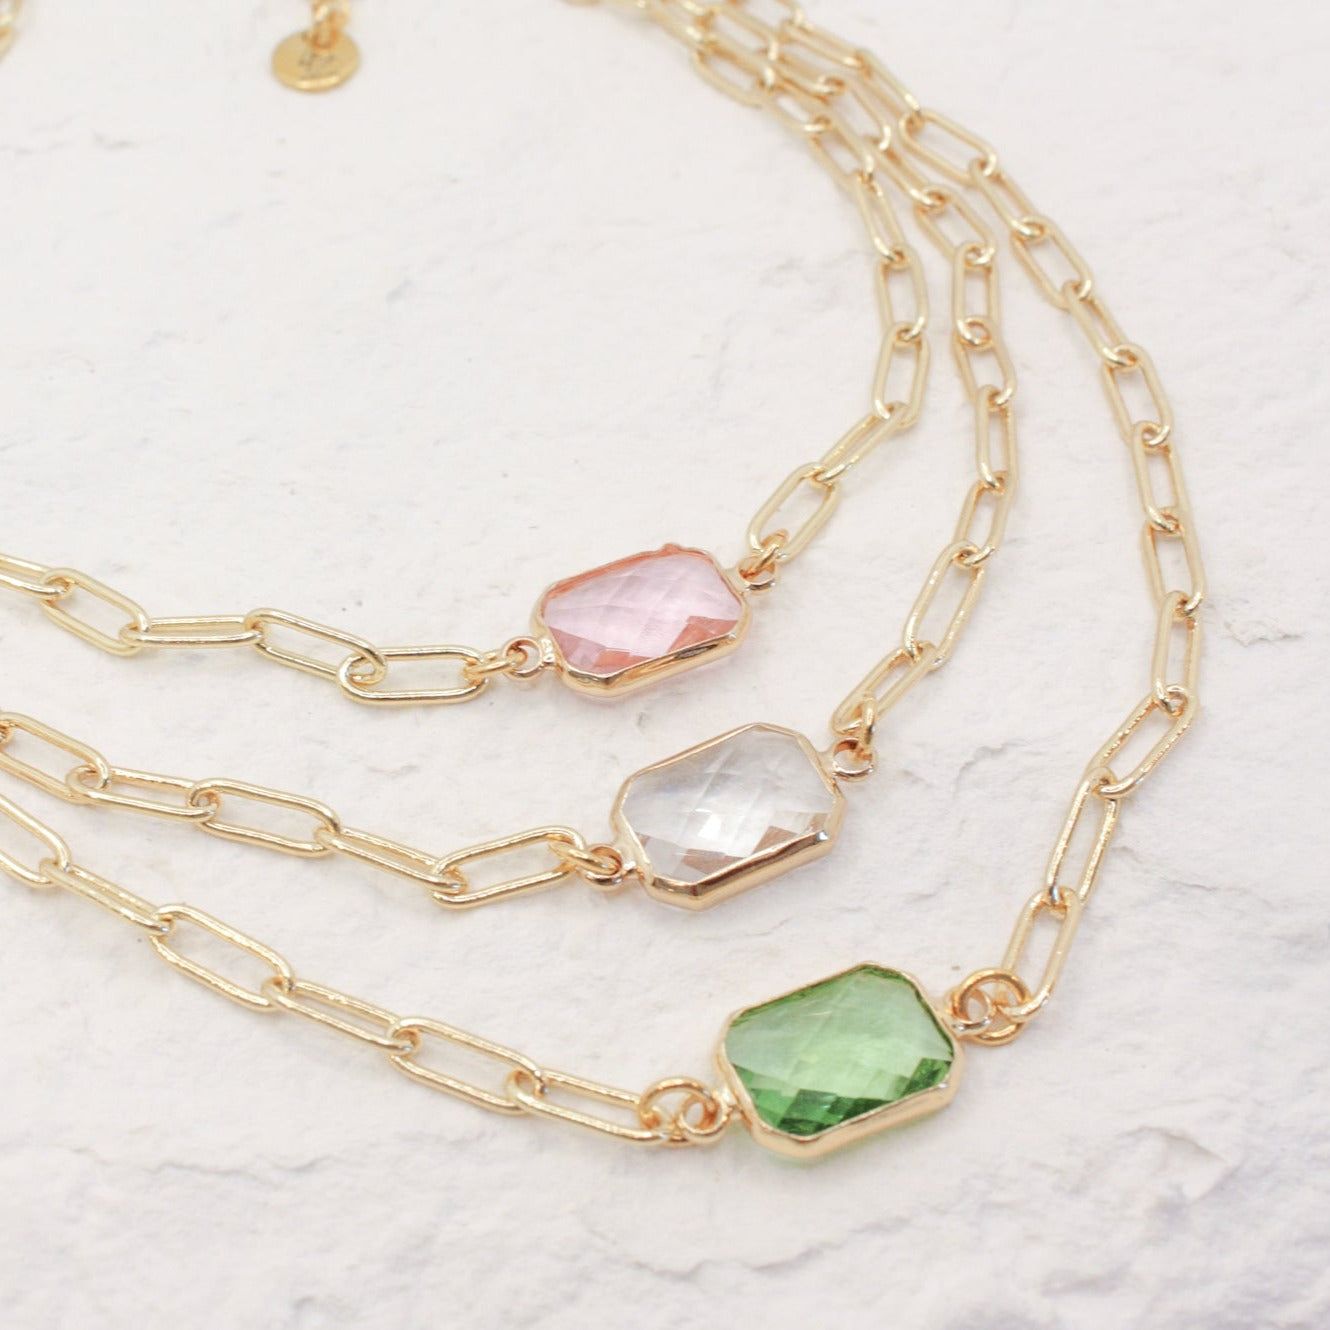 Camilla Gemstone Choker Necklace :: (Available in 3 colors)